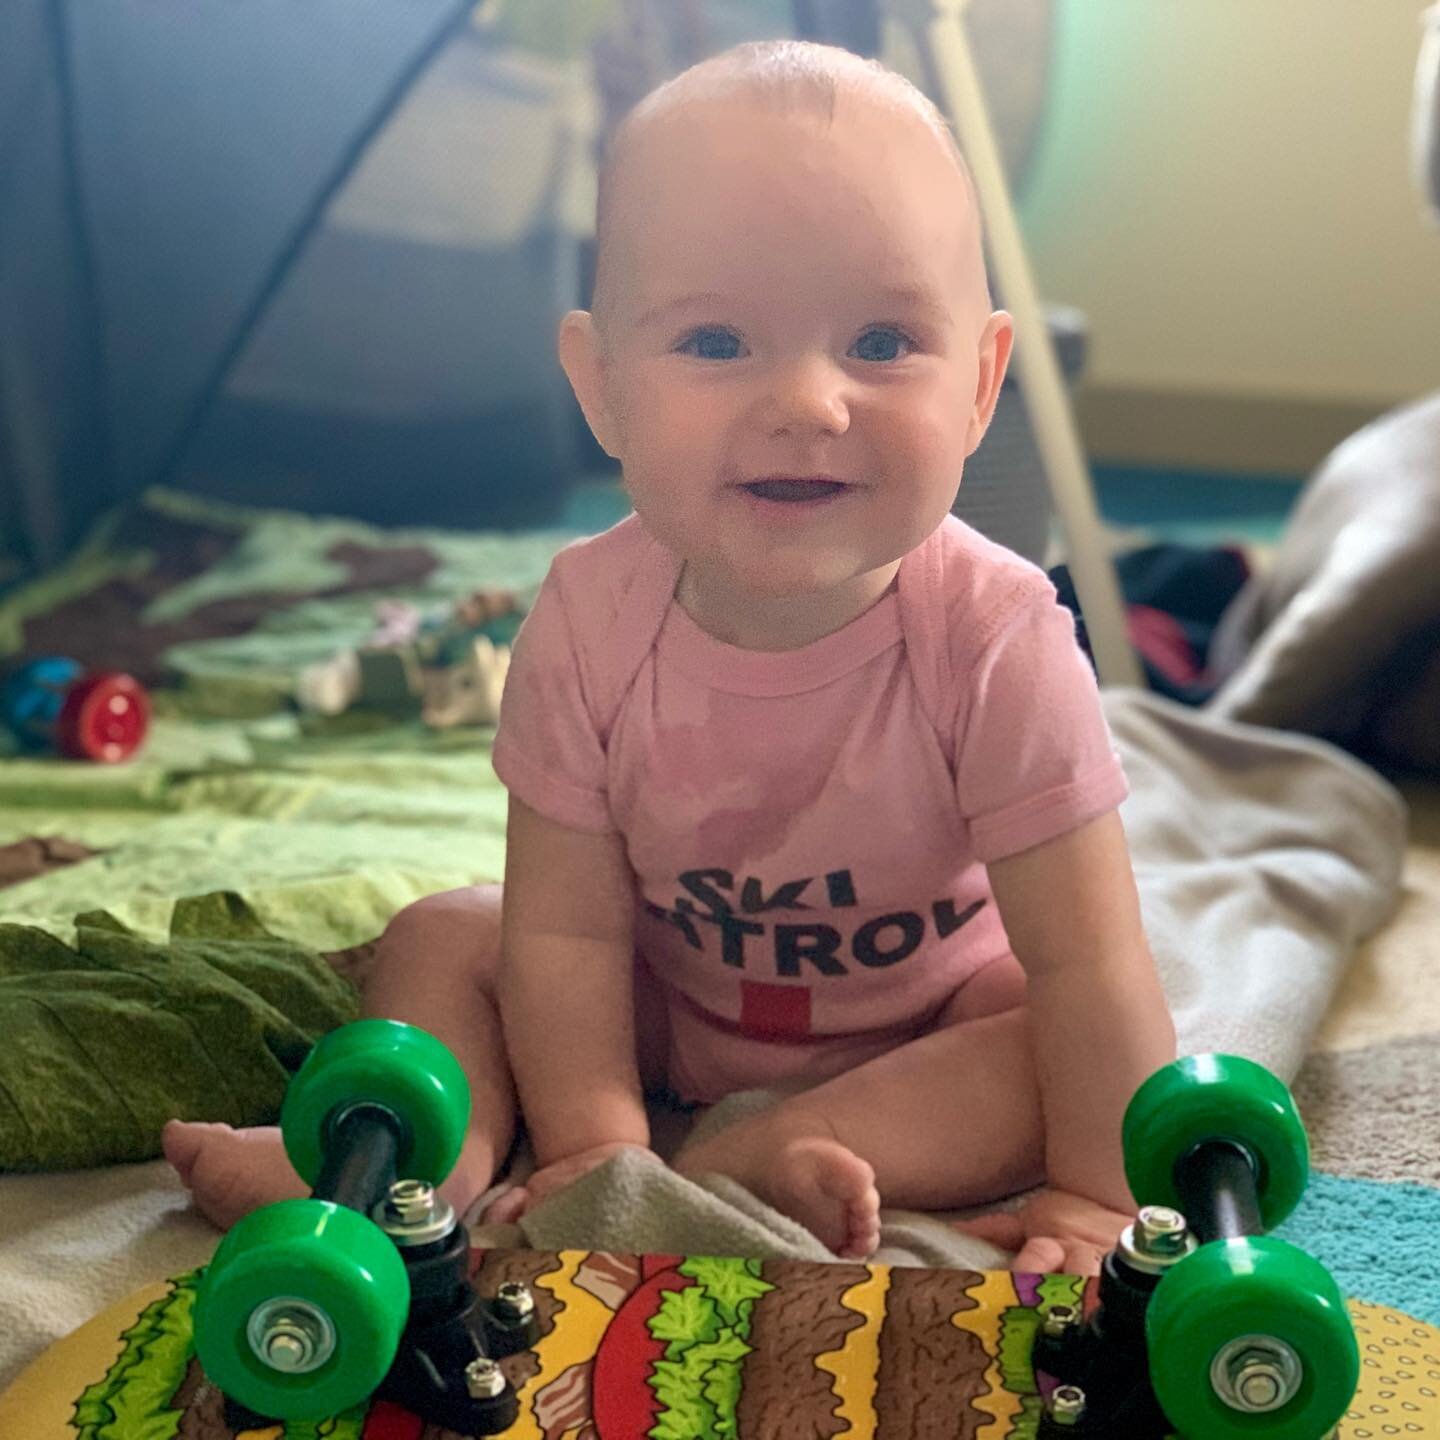 My heart melts daily, but this Father&rsquo;s Day was especially emotional. This is the face I&rsquo;d hoped to see when I gave her her first skateboard. Definitely wanted to give her the opportunity to someday say &ldquo;I was skating before I could